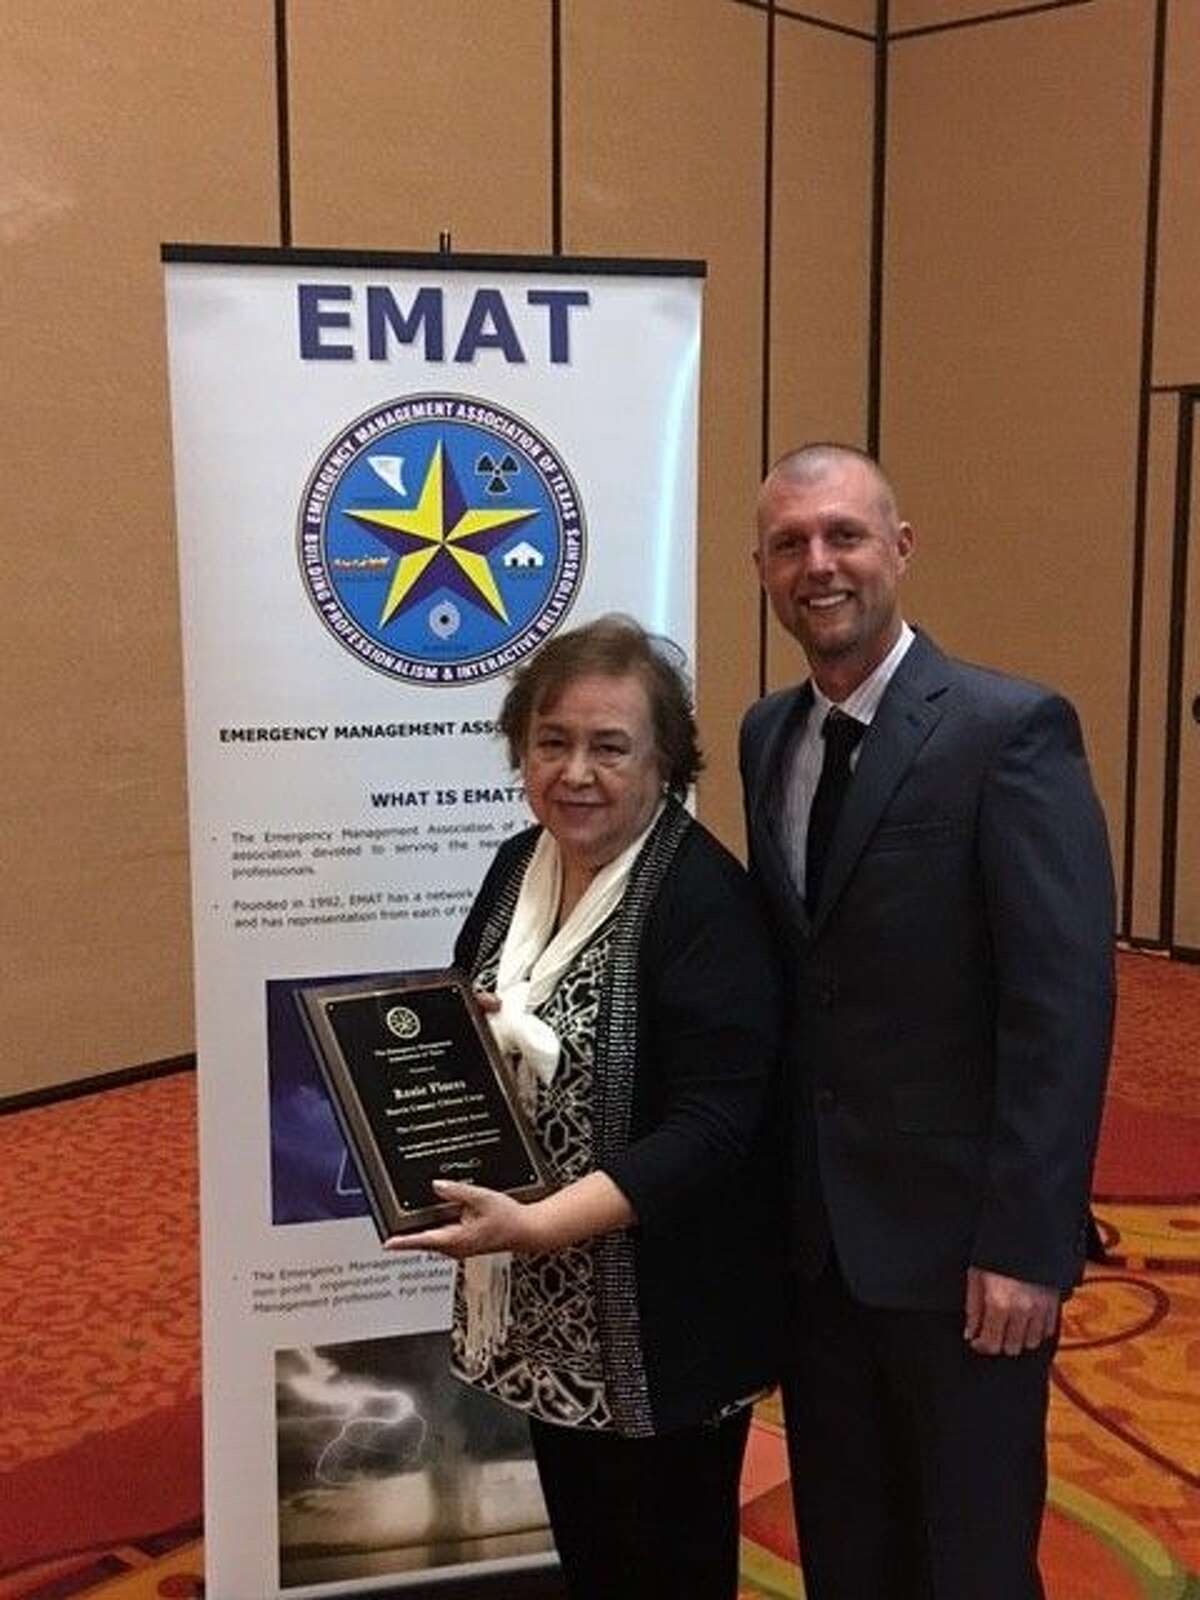 Harris County Teen CERT Coordinator Rosie Flores receives the EMAT Community Service Award from EMAT President Jeb Lacey on Feb. 9 in San Marcos.